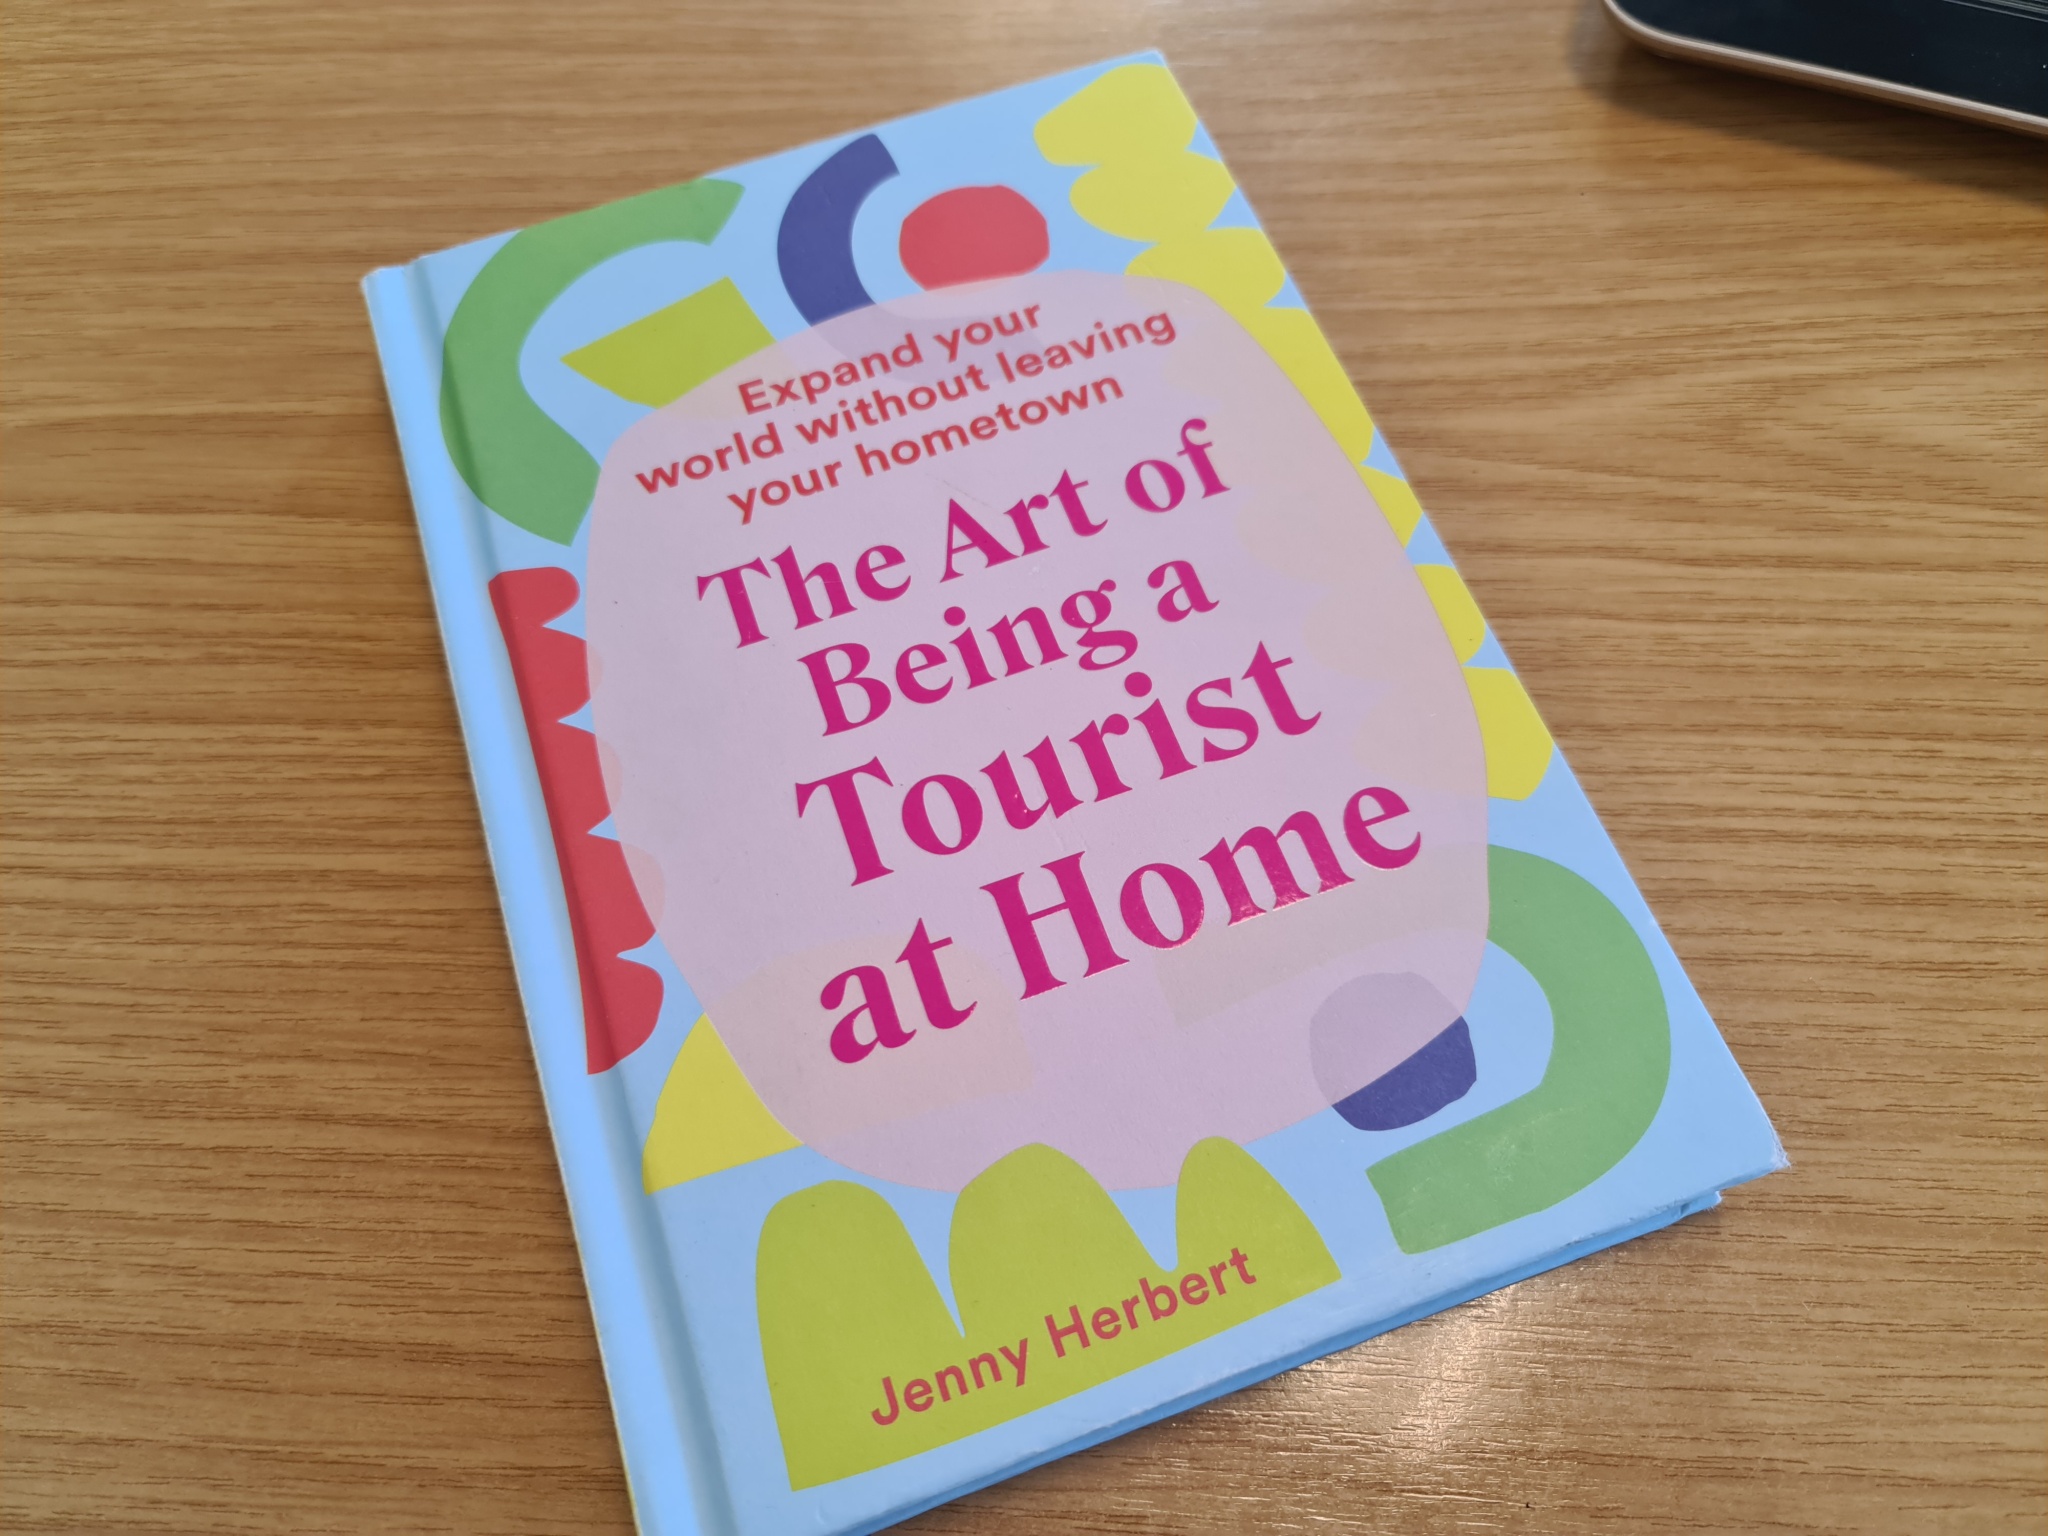 Book Friday: The Art of Being a Tourist at Home by Jenny Herbert